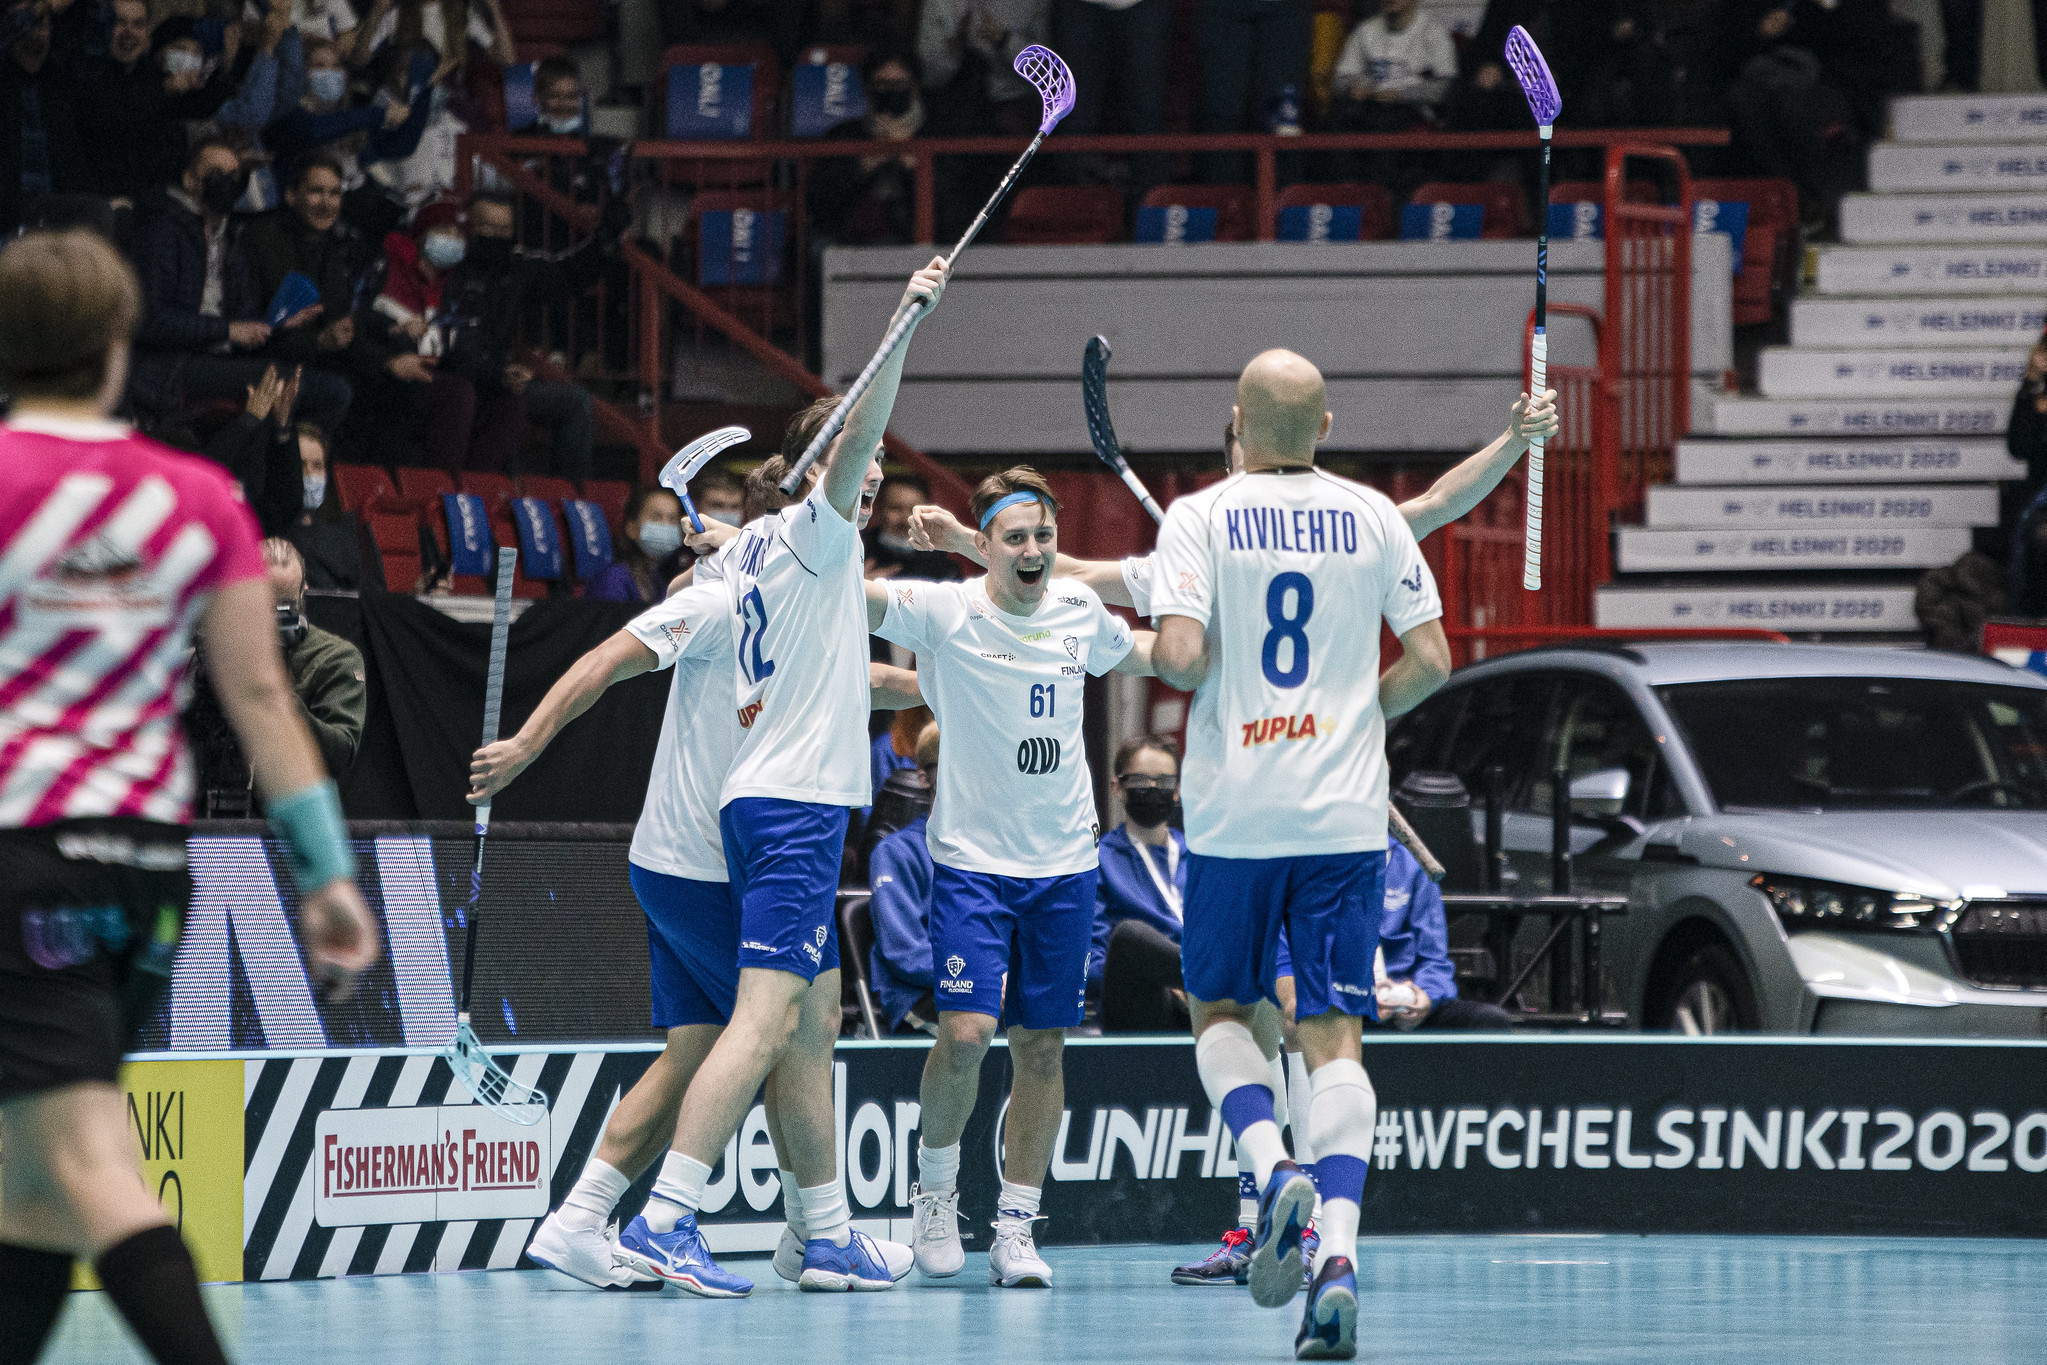 Sweden and Finland among European qualifiers for Men's World Floorball Championship